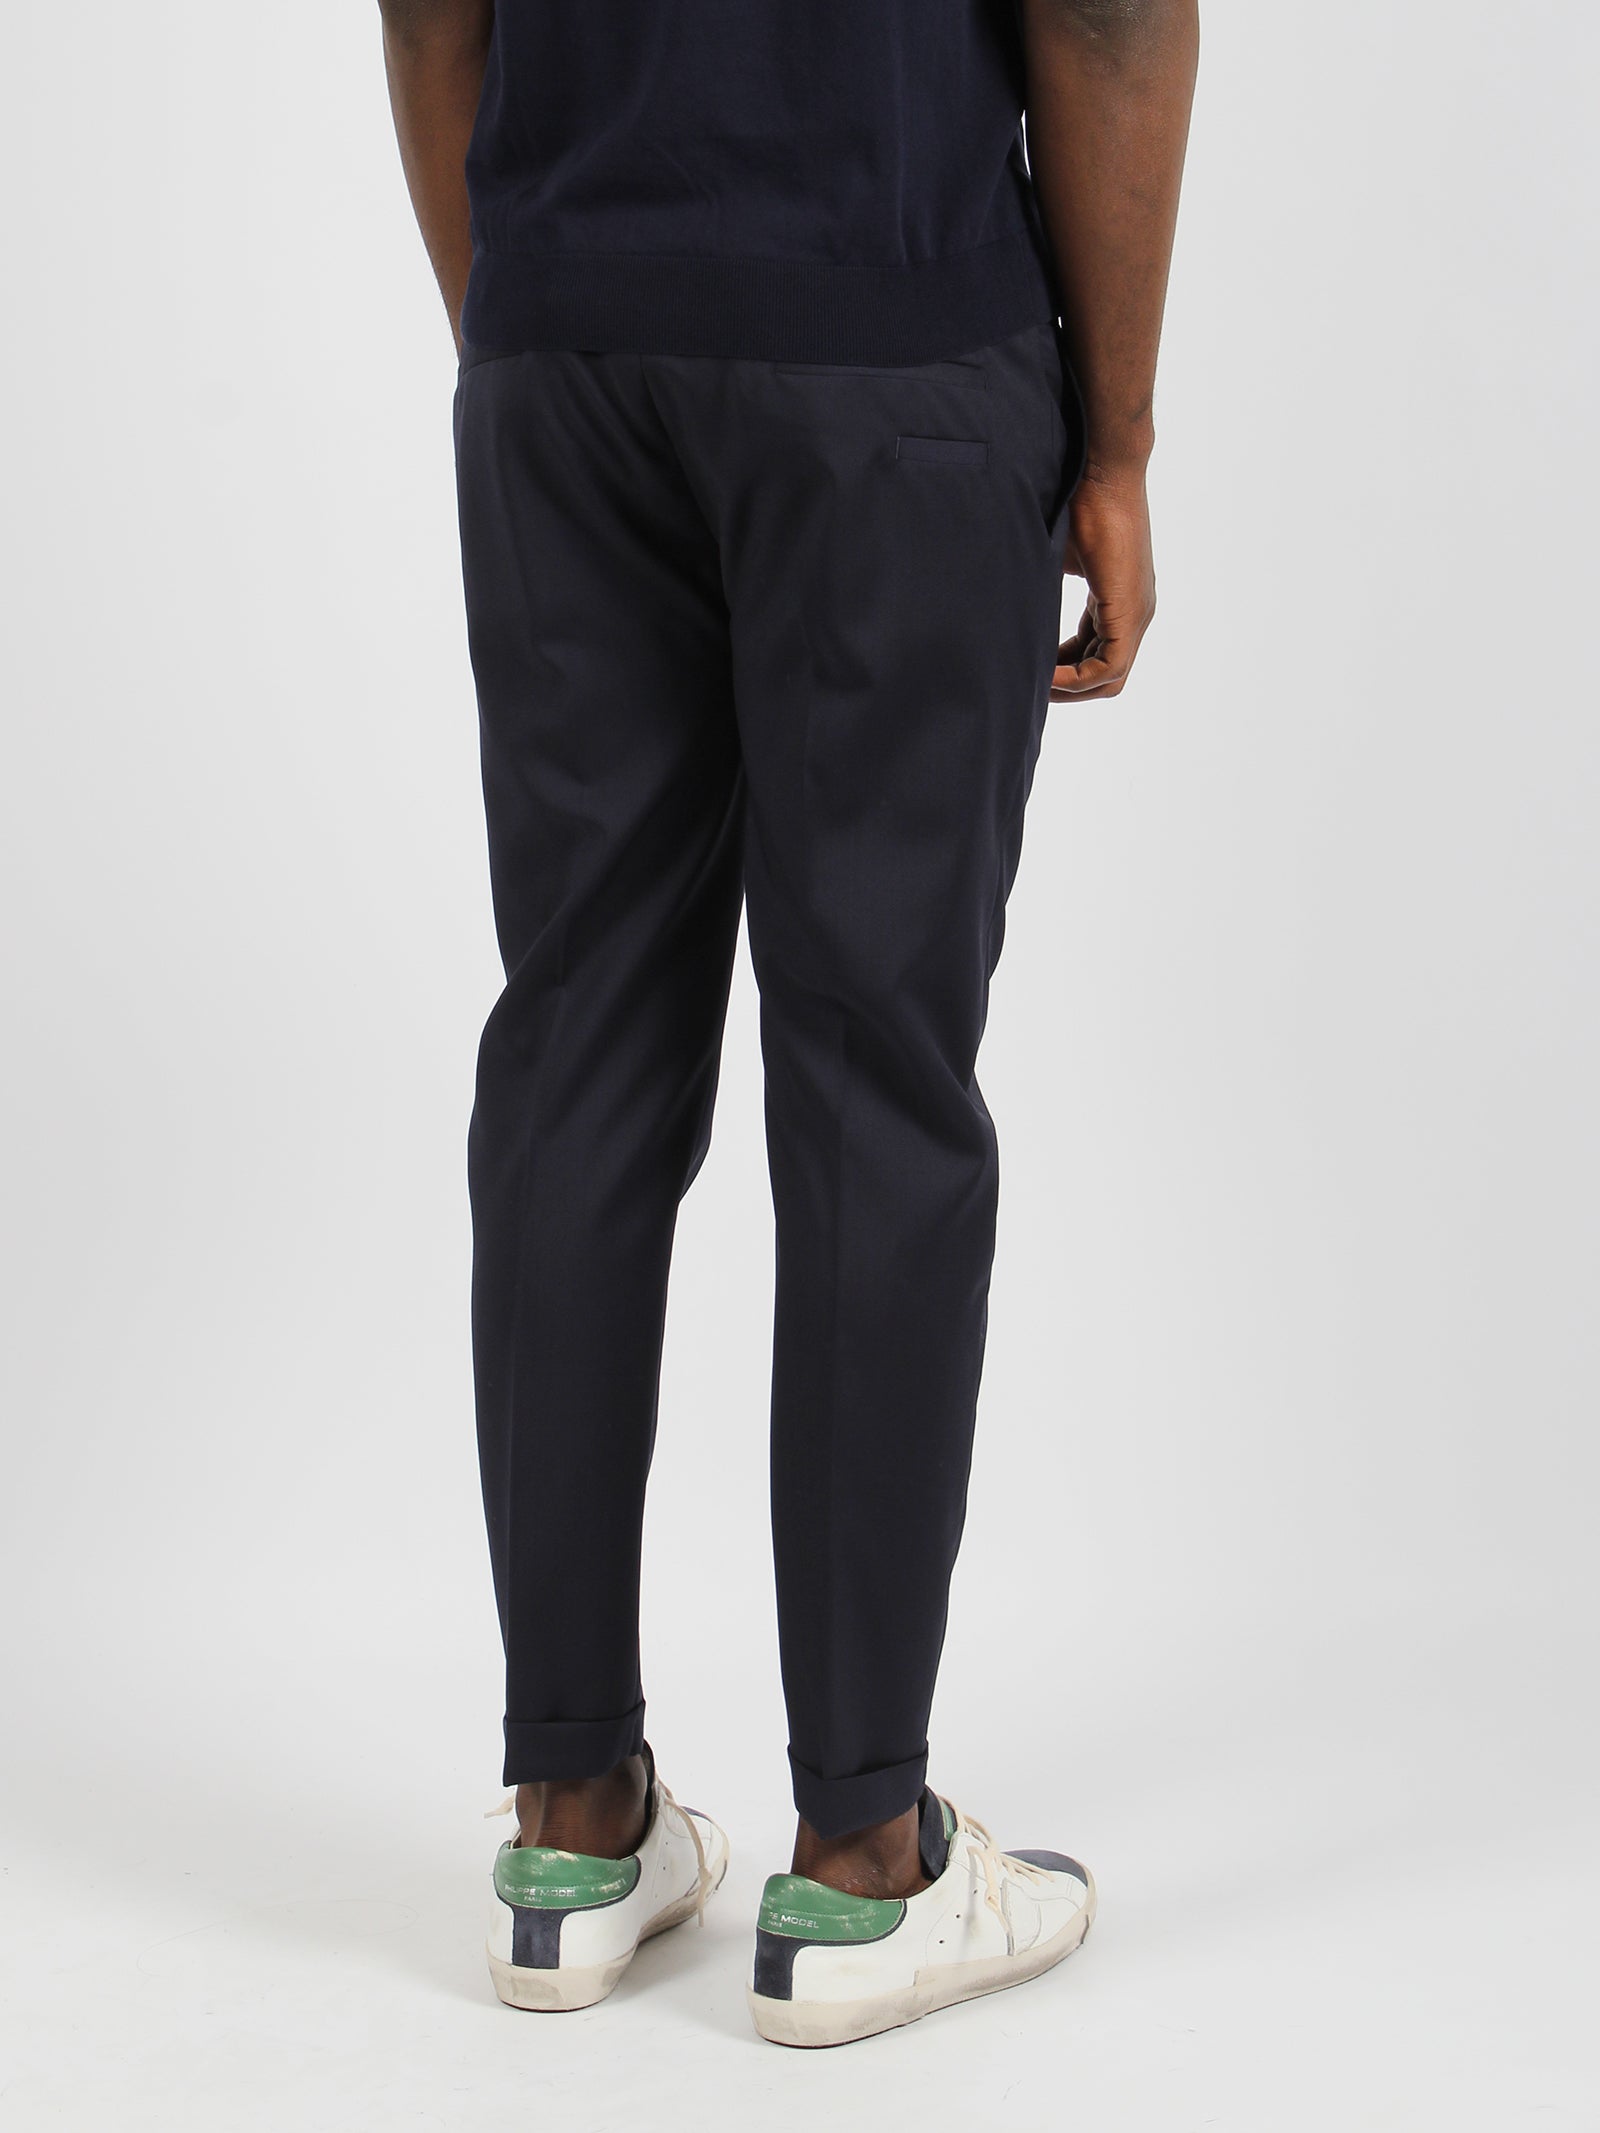 Shop Low Brand Riviera Elastic Tropical Wool Trousers